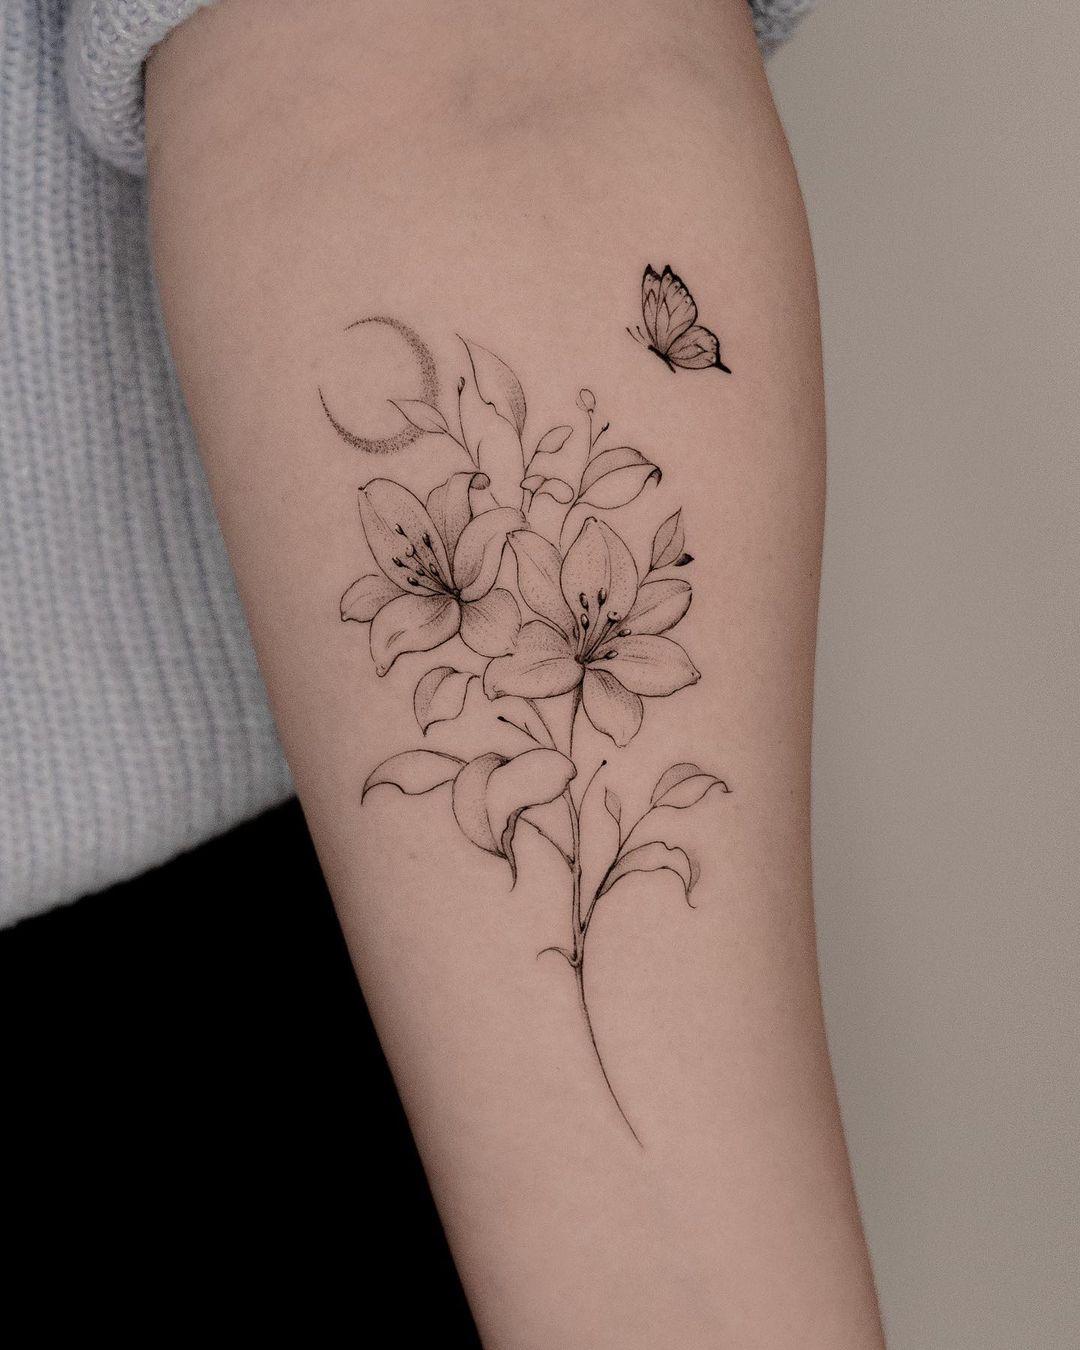 Fineline lily with butterfly tattoo by jk.tattoo